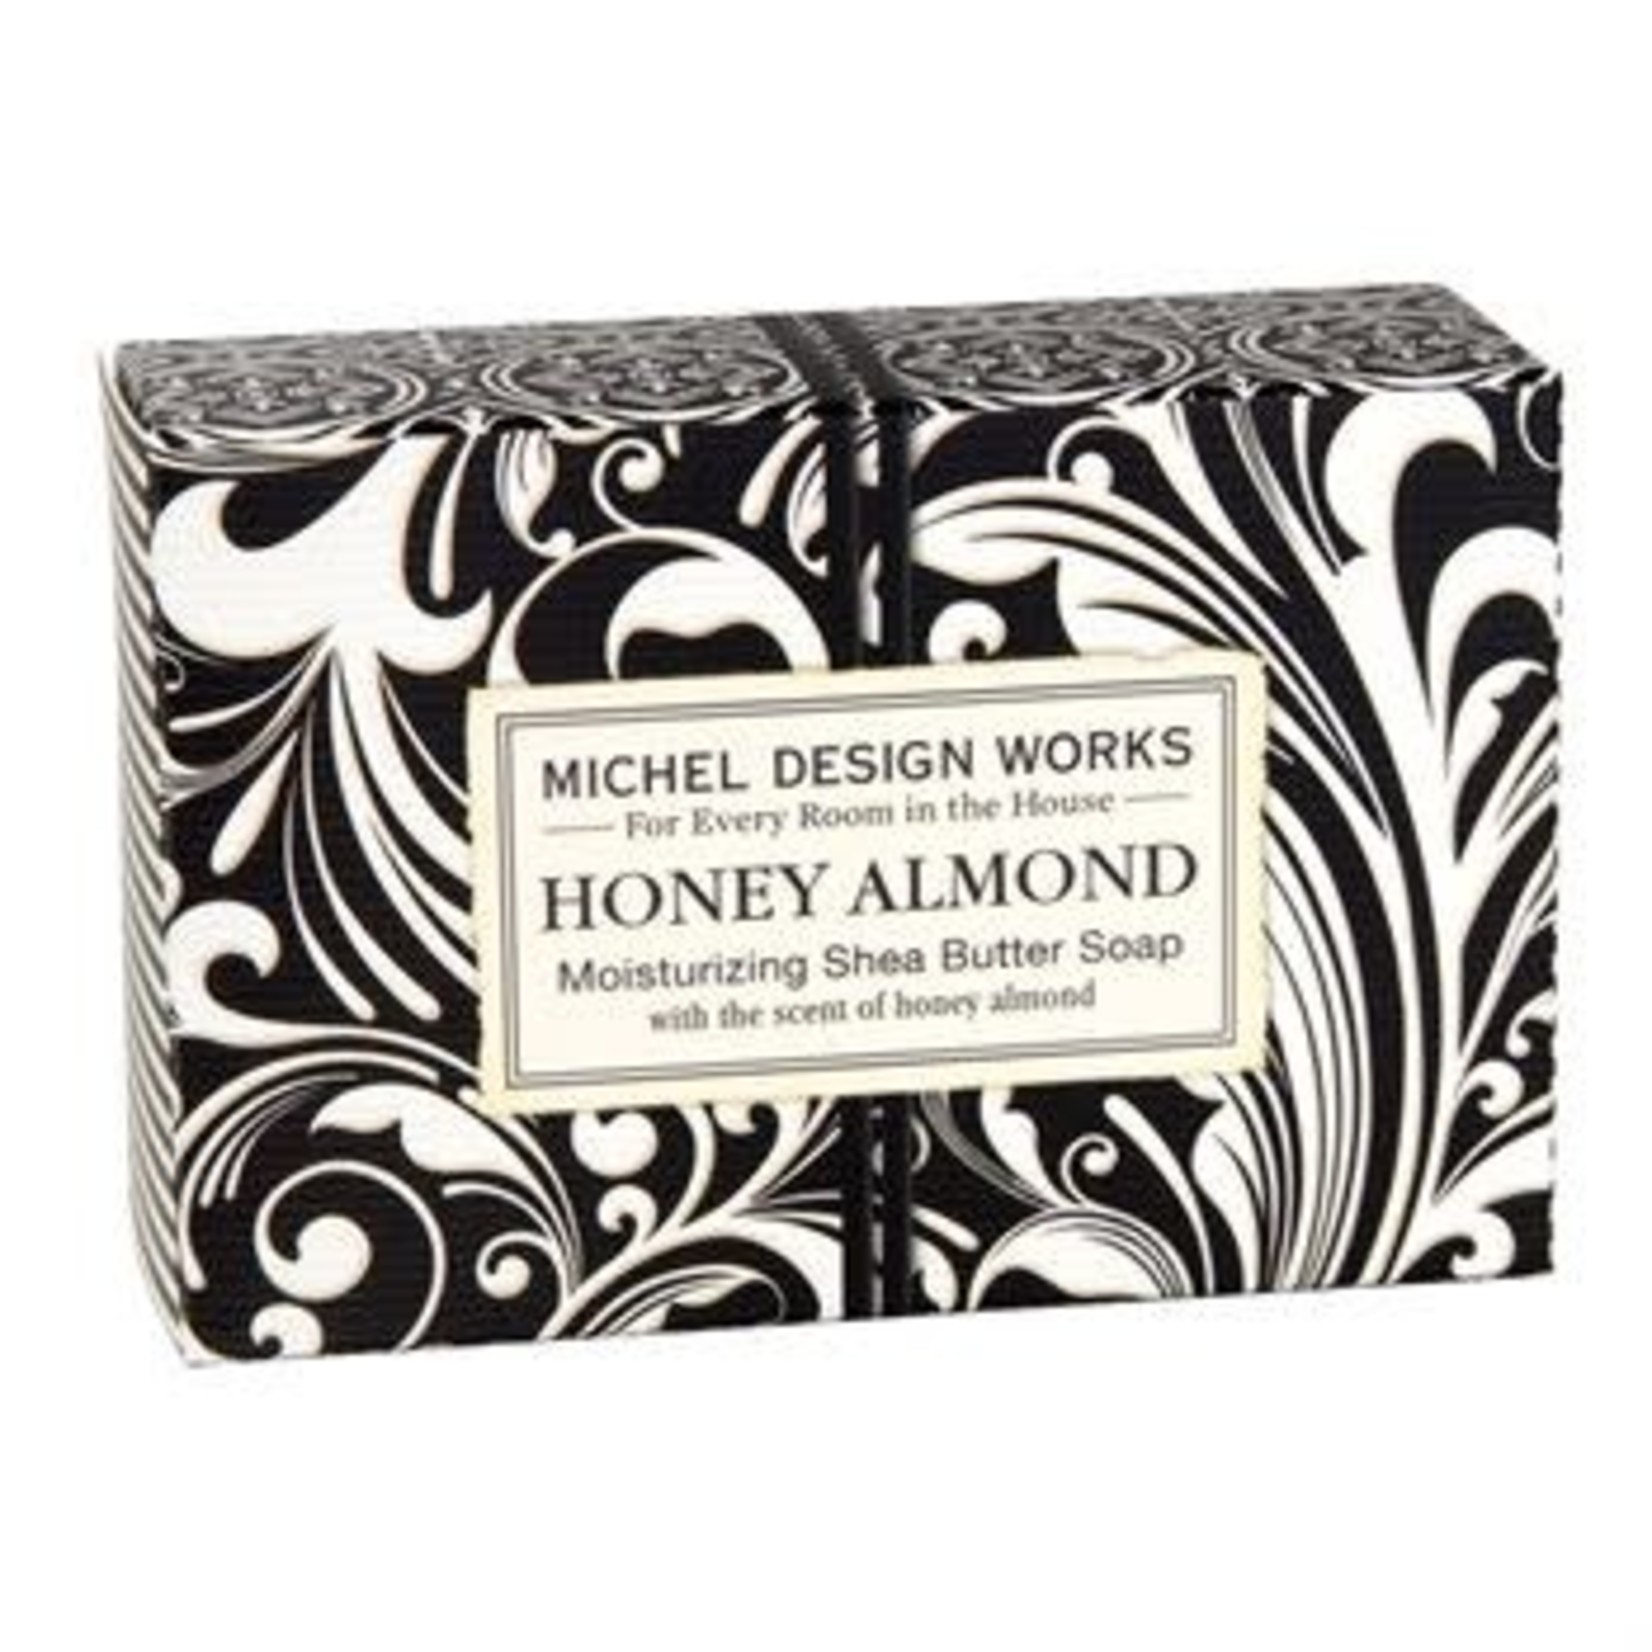 MICHELE DESIGN WORKS HONEY ALMOND BOXED SOAP